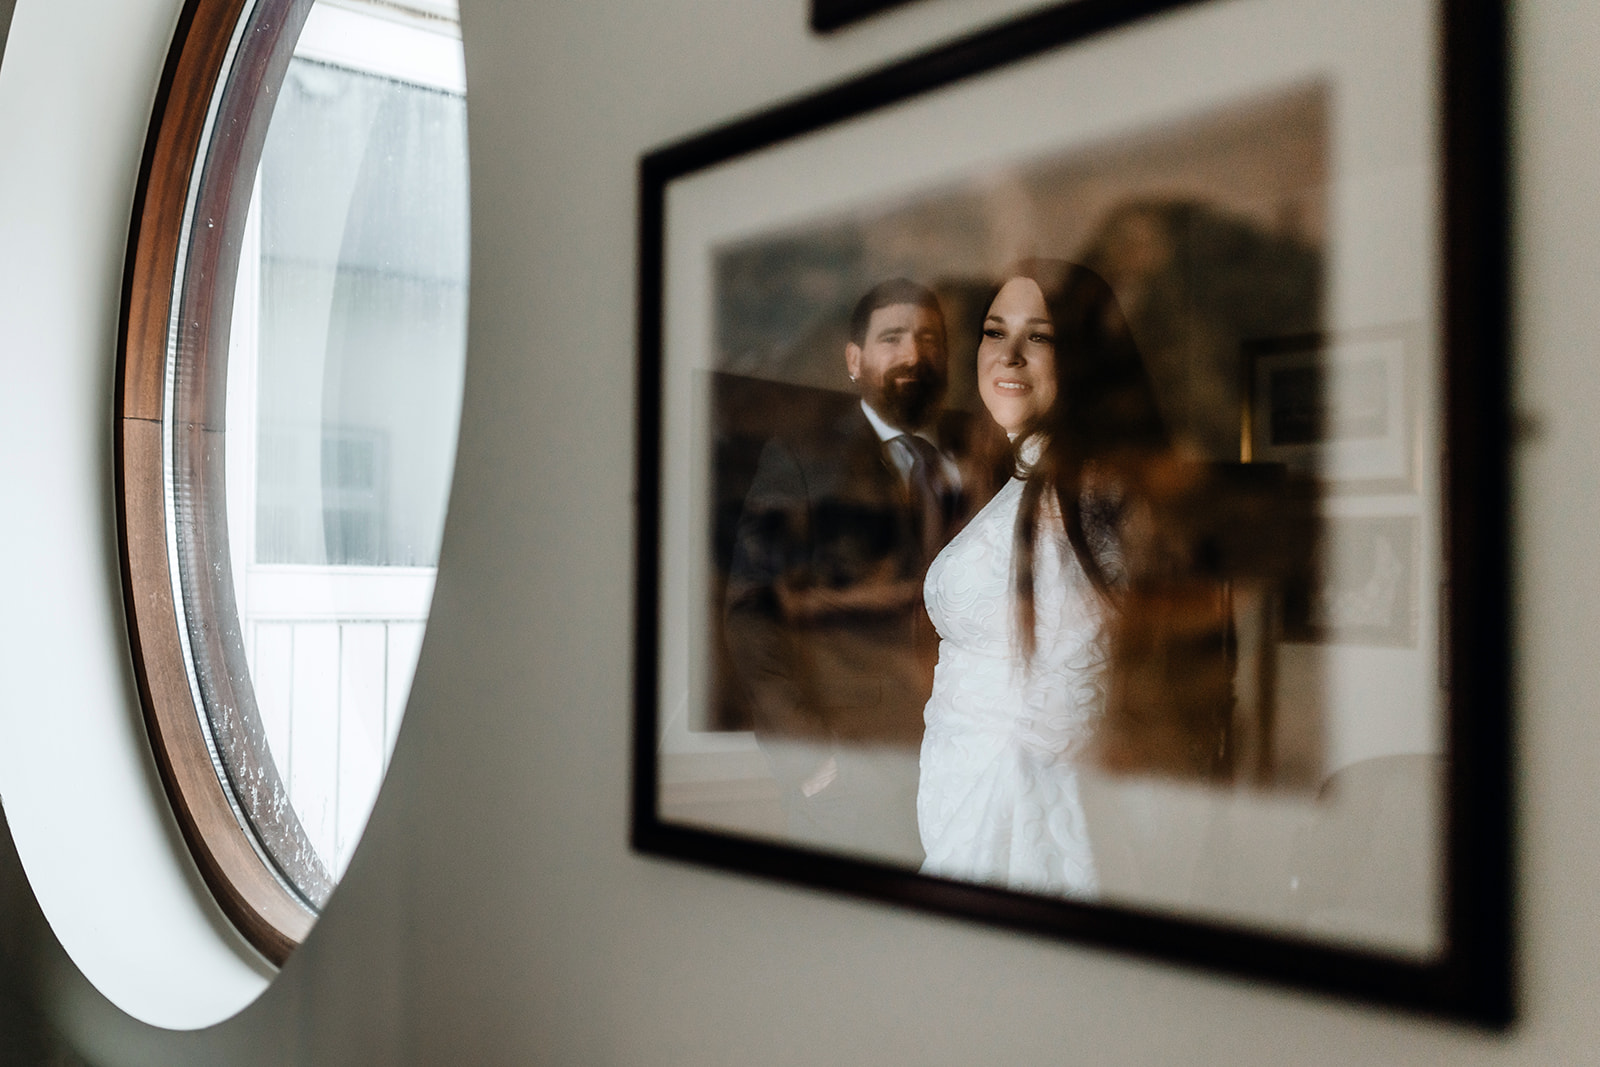 creative Portrait photo of a couple who eloped from the US to Iceland